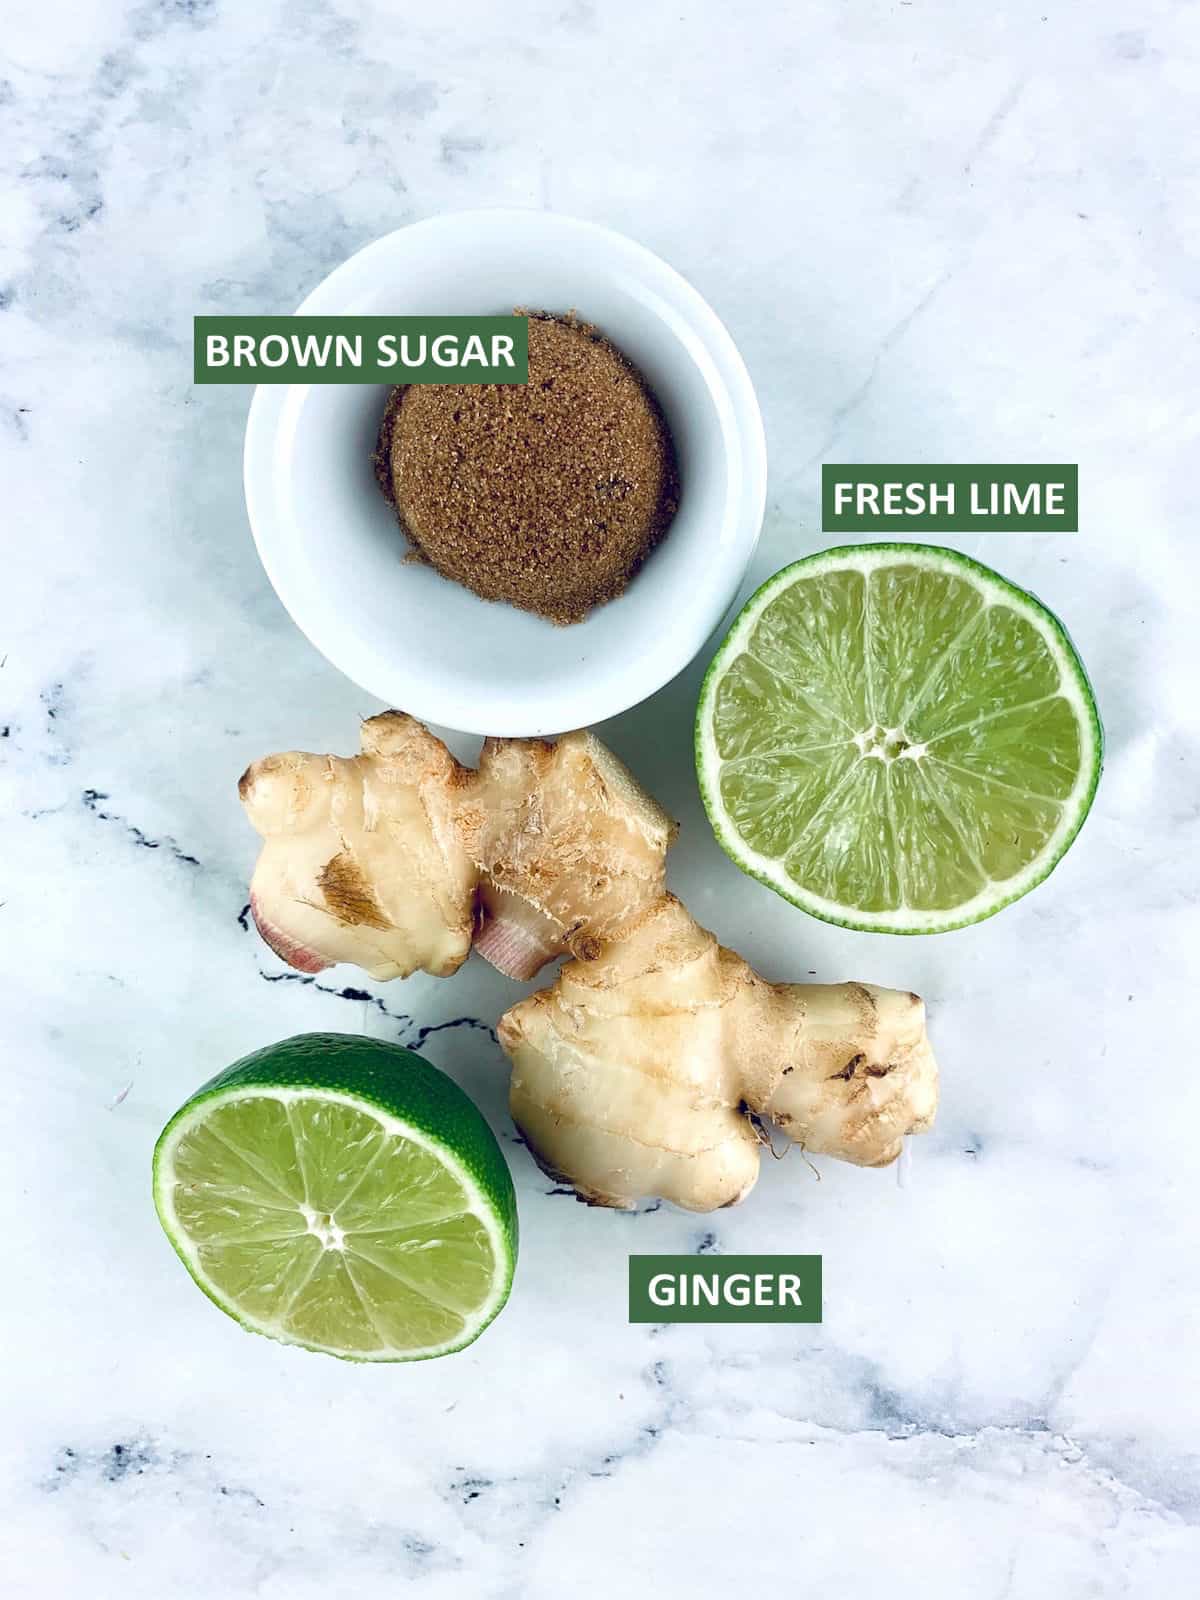 LABELLED INGREDIENTS NEEDED FOR SWEET GINGER & LIME DRESSING